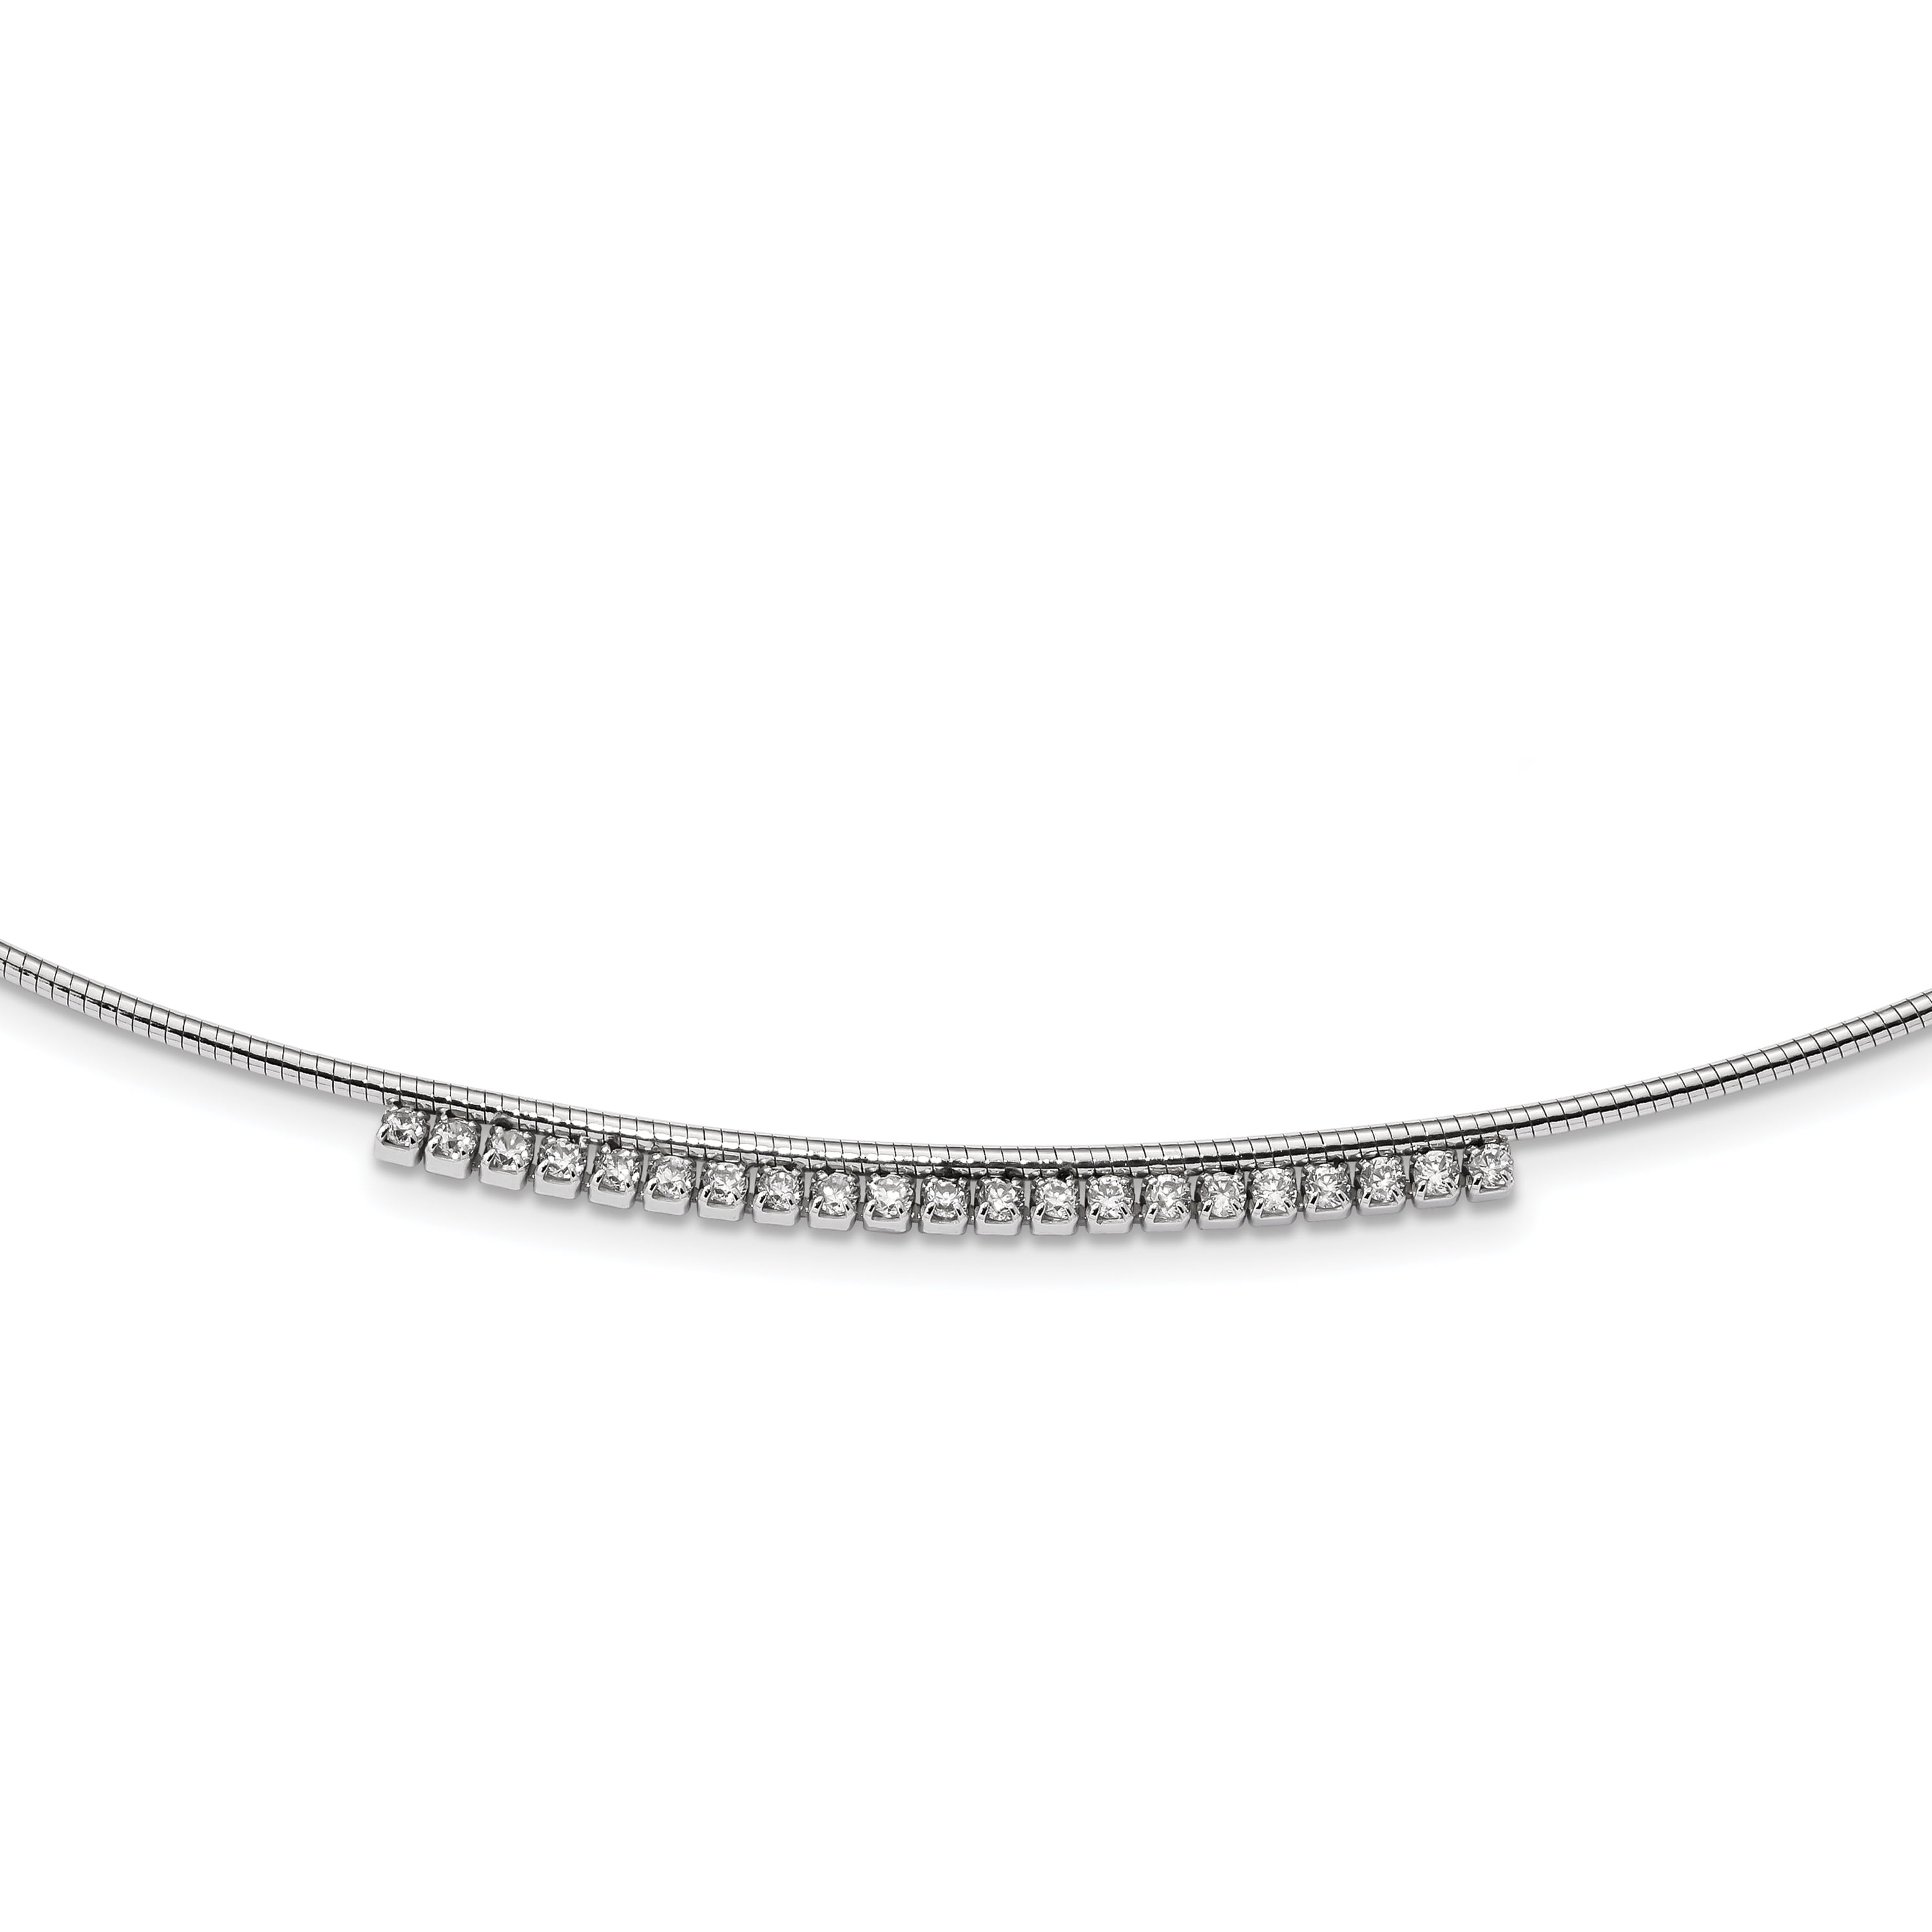 Beautiful Sterling silver 925 sterling Sterling Silver Rhodium-plated with CZ Infinity w/ 2 IN EXT Necklace